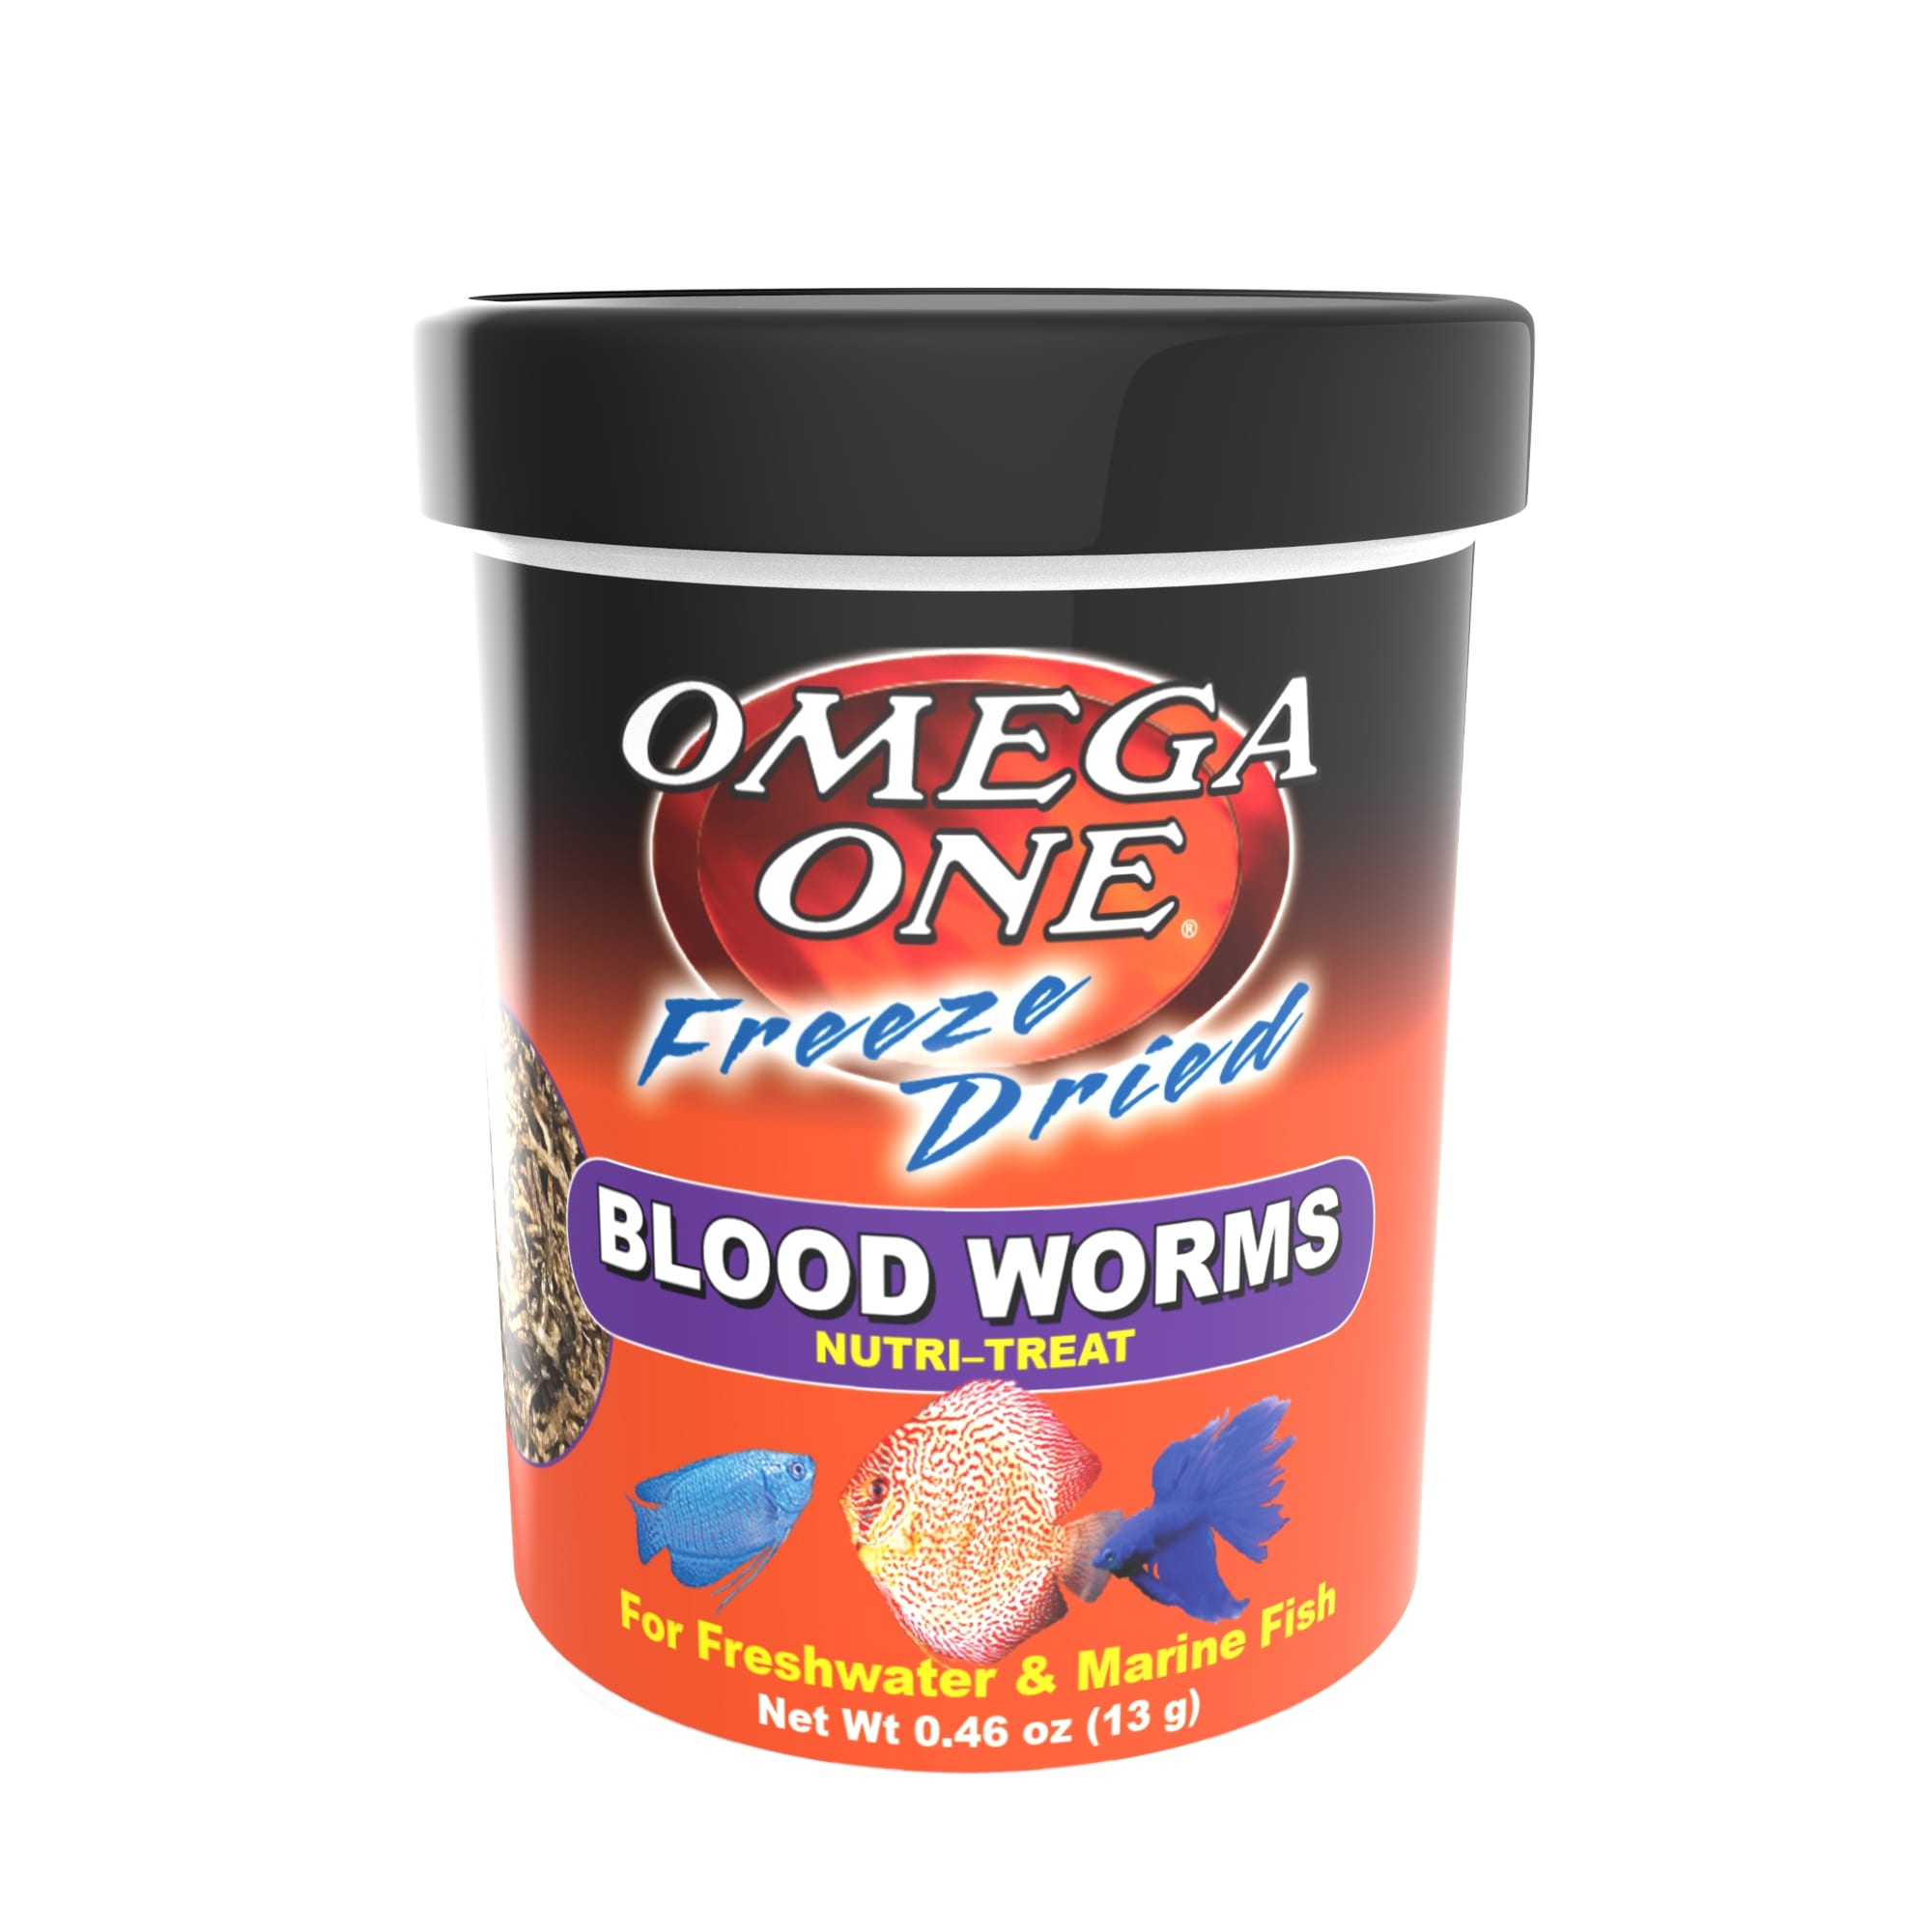 Frozen blood worms are great! Not a fan of the freeze dried ones becau, bloodworm